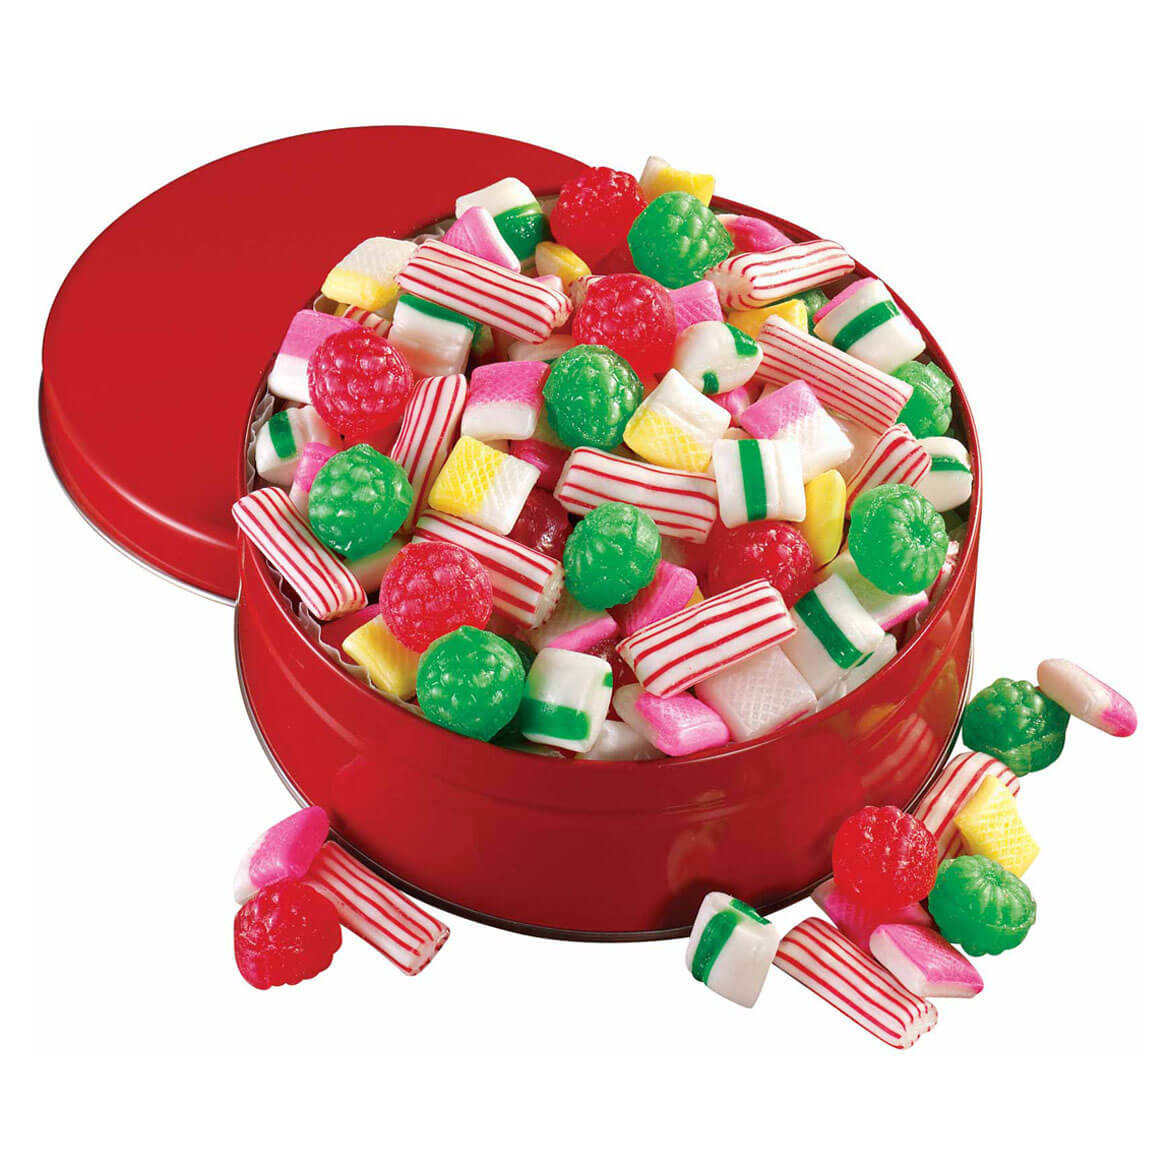 Old Fashioned Christmas Candy
 Sugar Free Old Fashioned Christmas Candy Tin Hard Candy